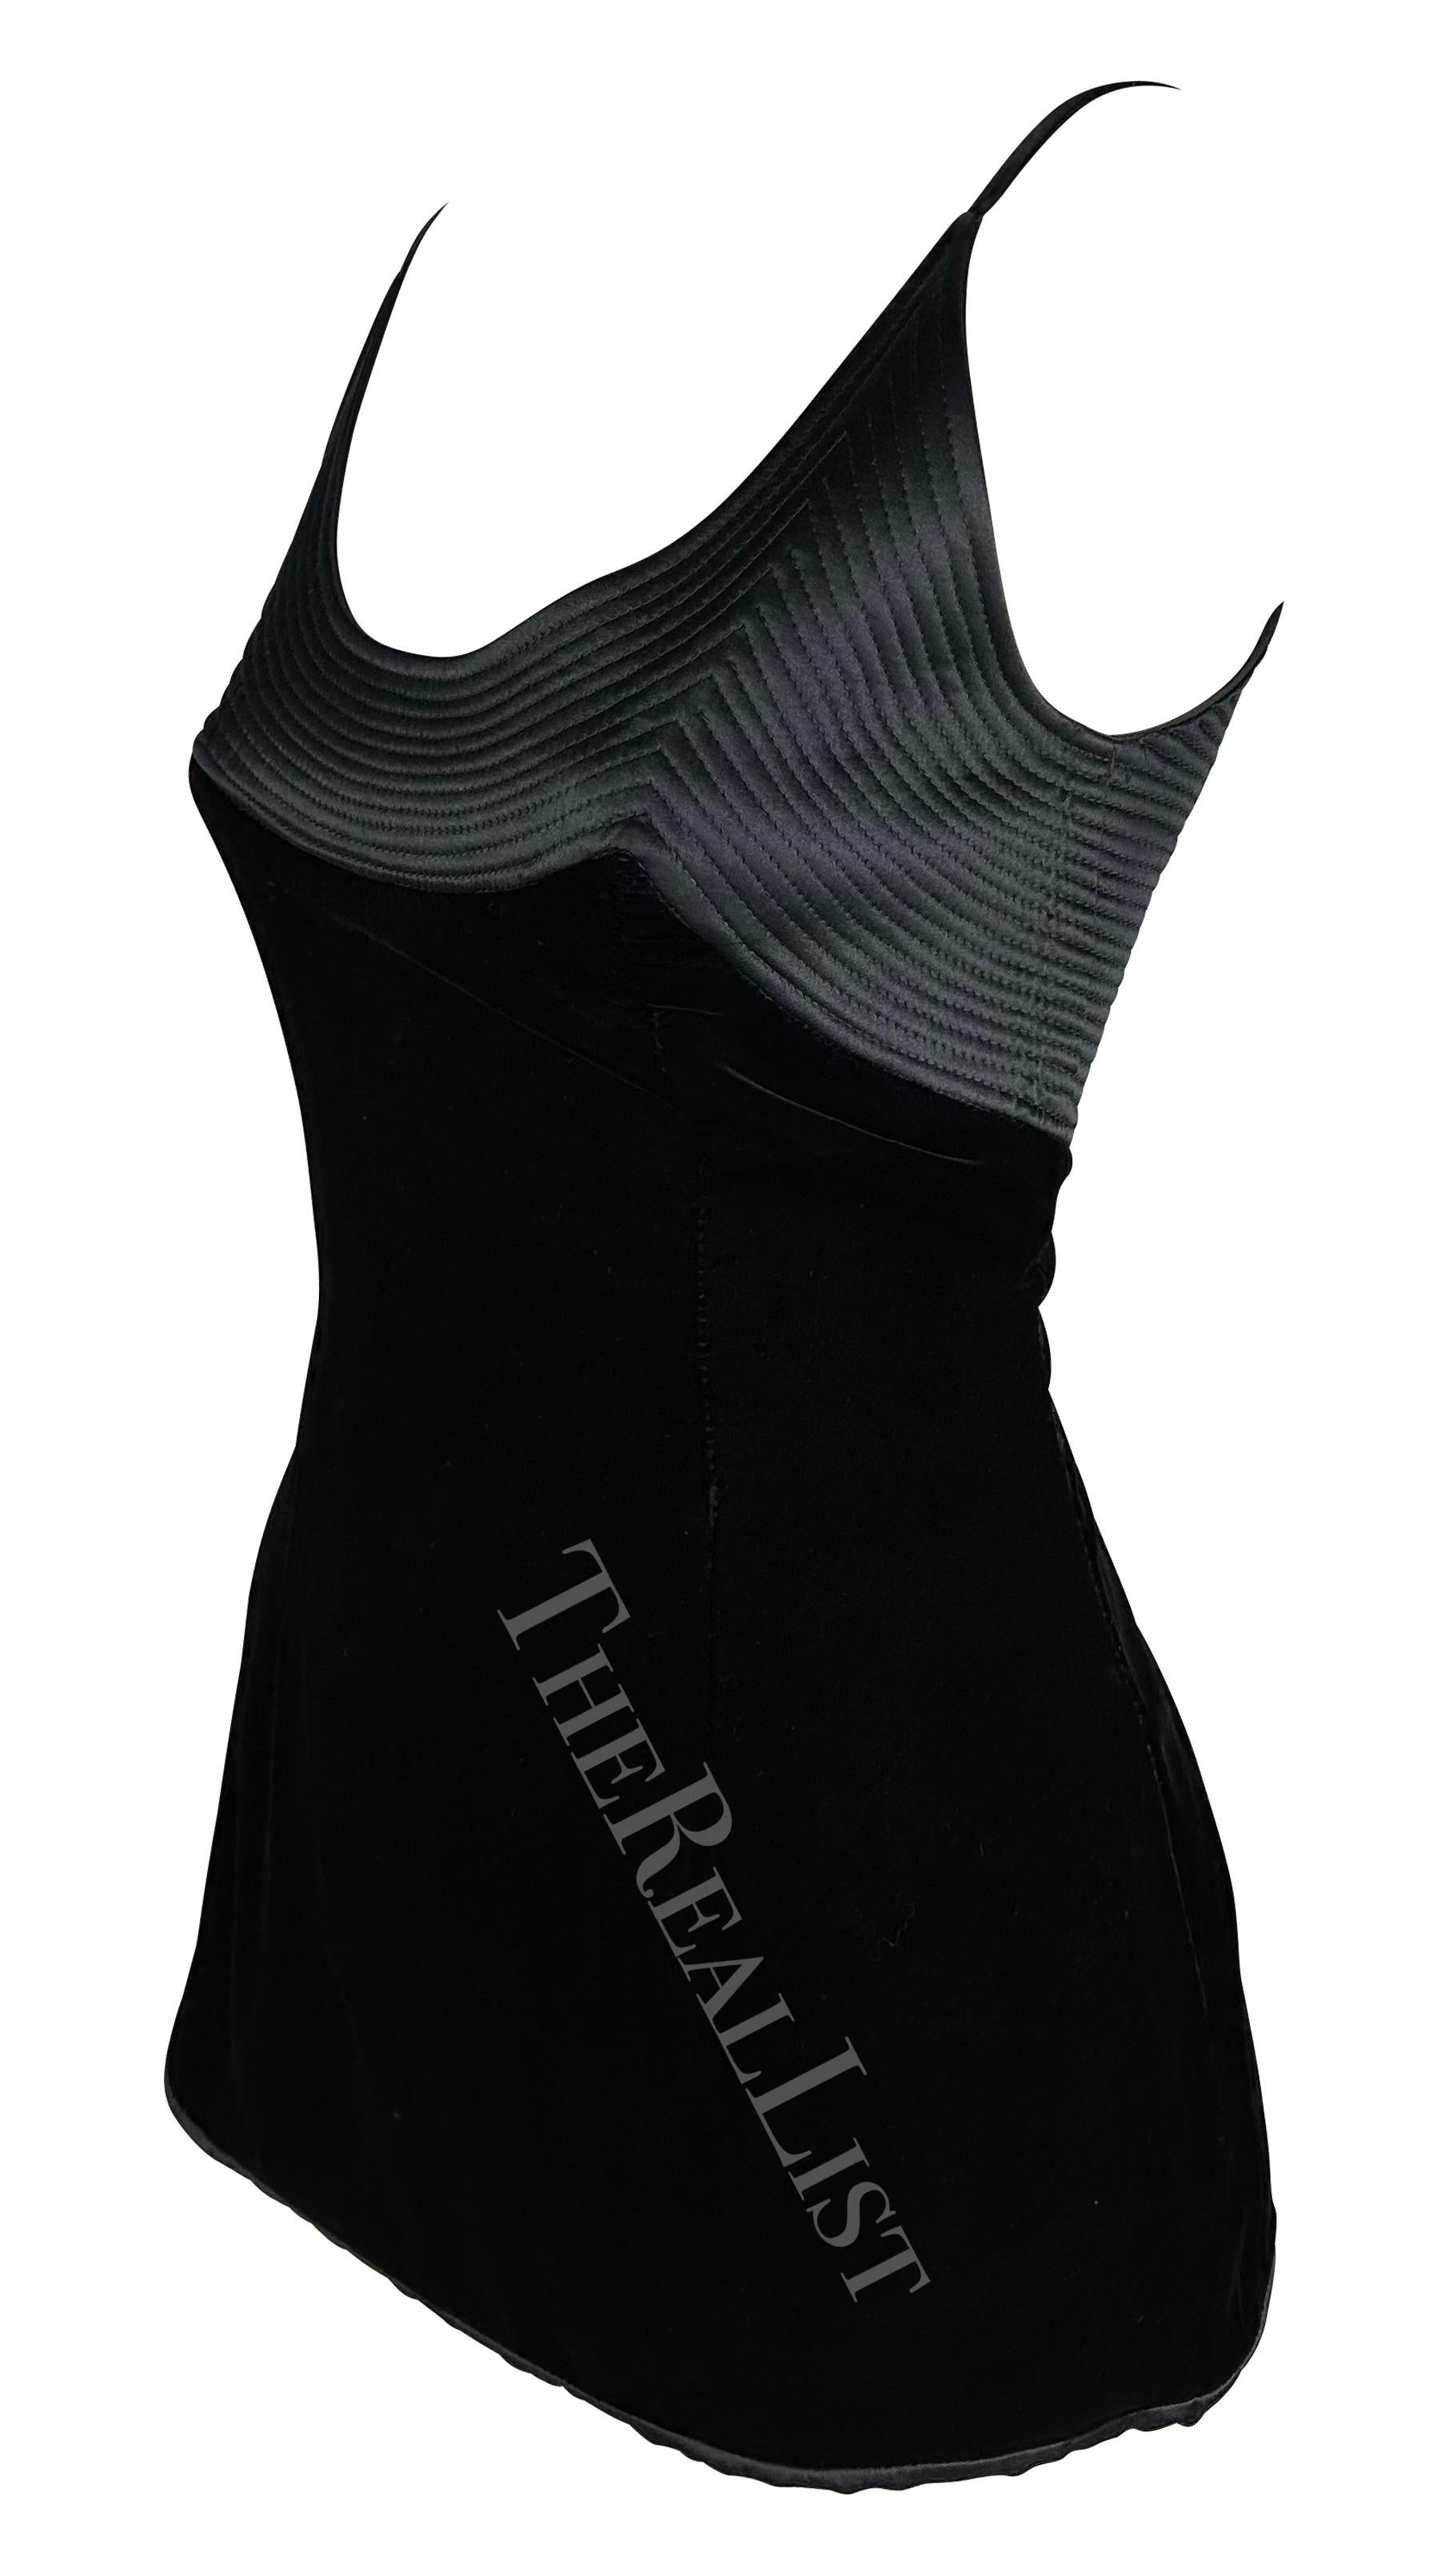 1990s Valentino Garavani Black Velvet Embroidered Tank Top In Excellent Condition For Sale In West Hollywood, CA